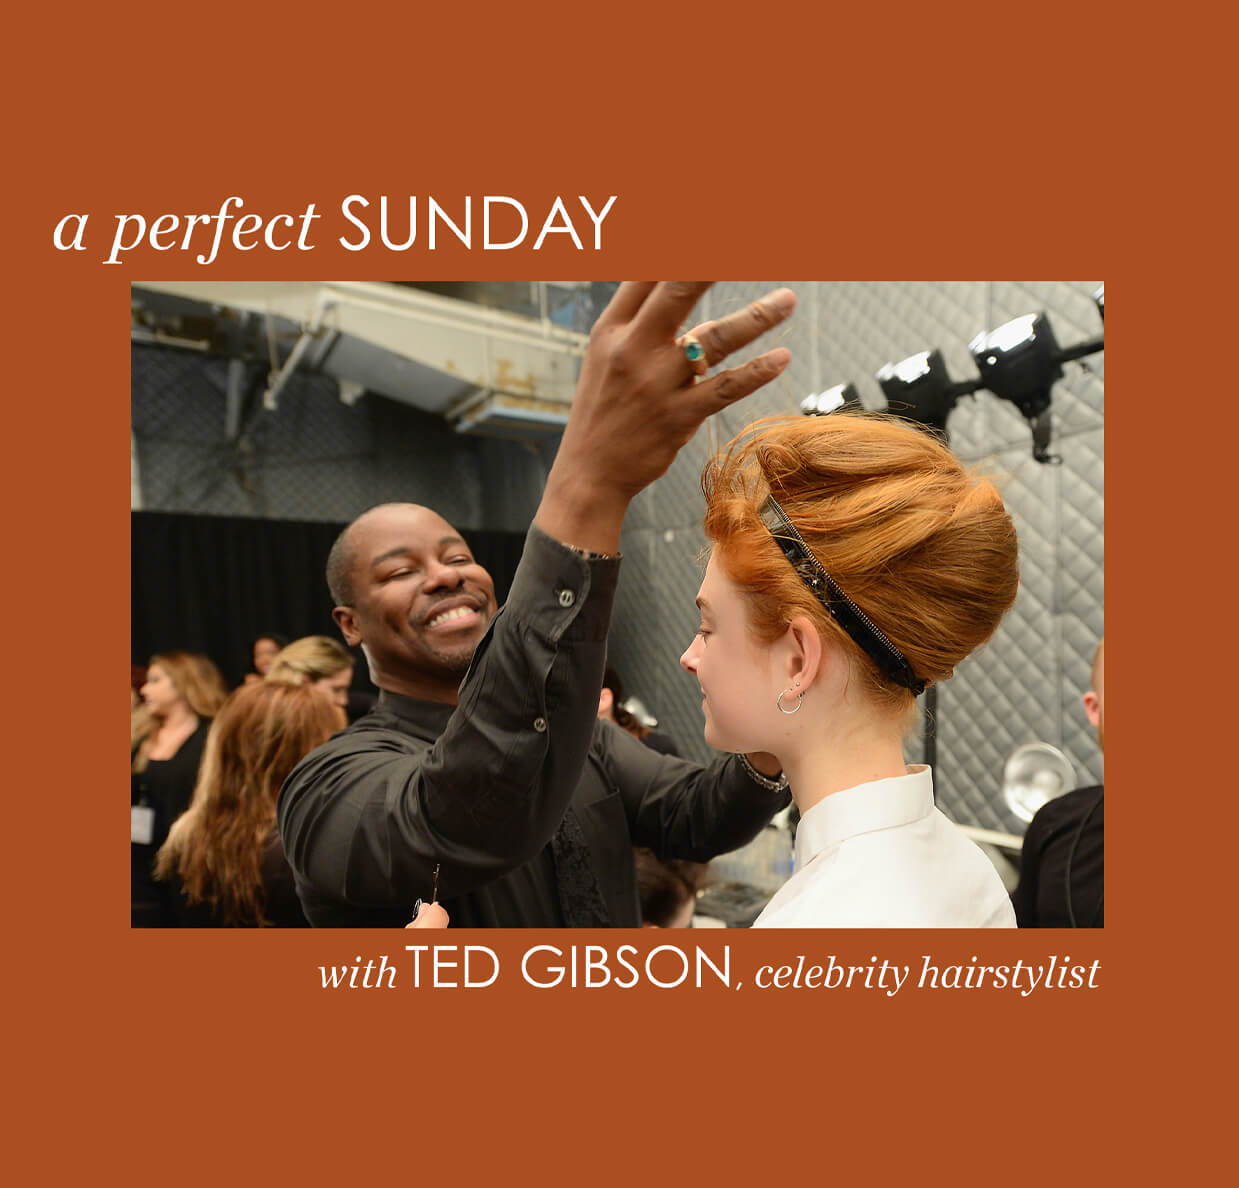 picture of Ted Gibson, celebrity hairstylist